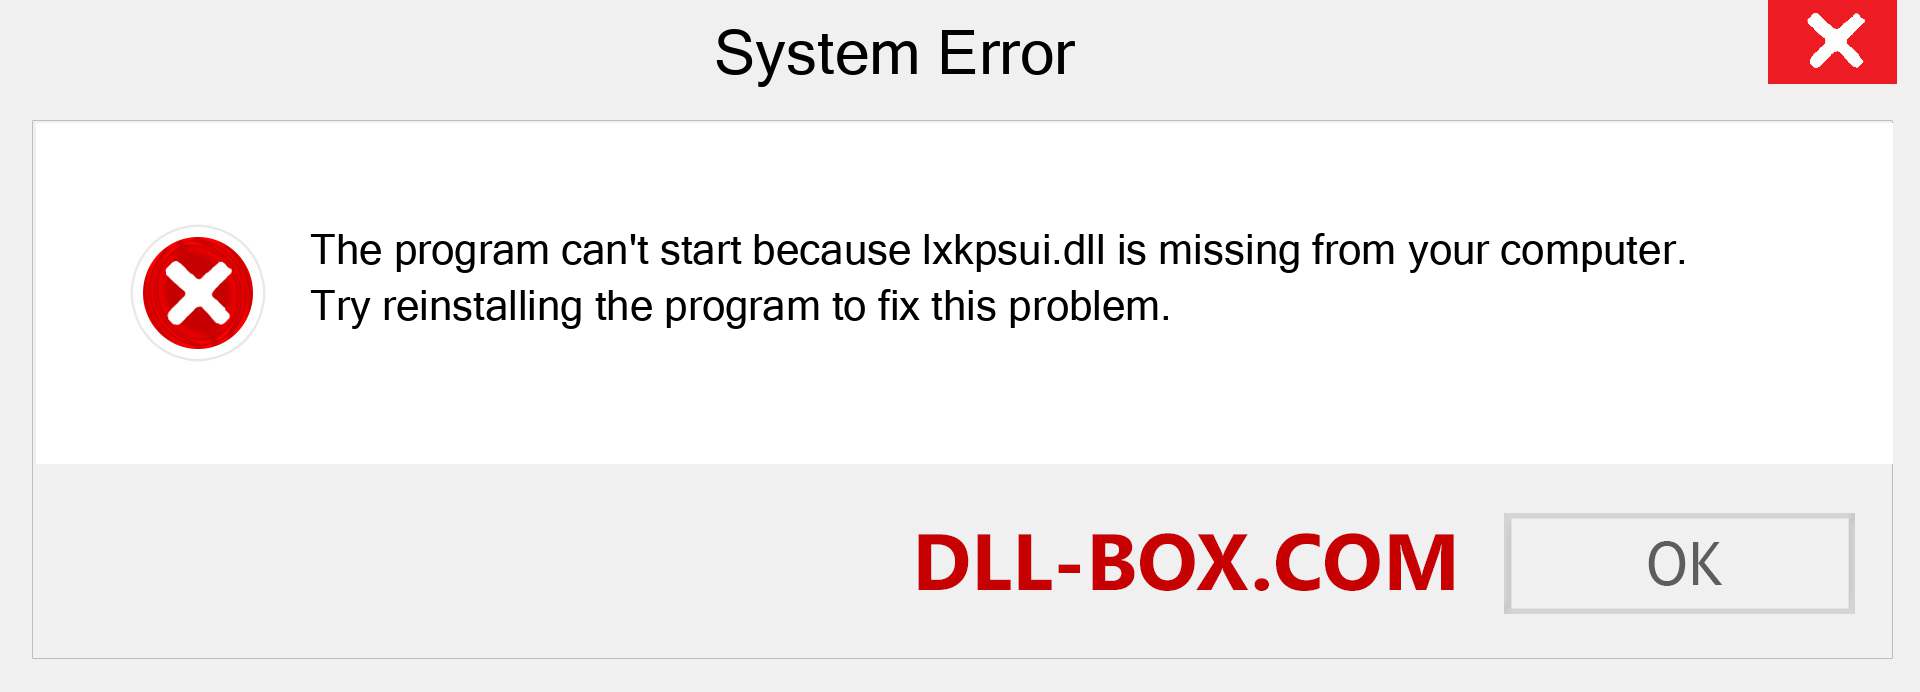  lxkpsui.dll file is missing?. Download for Windows 7, 8, 10 - Fix  lxkpsui dll Missing Error on Windows, photos, images